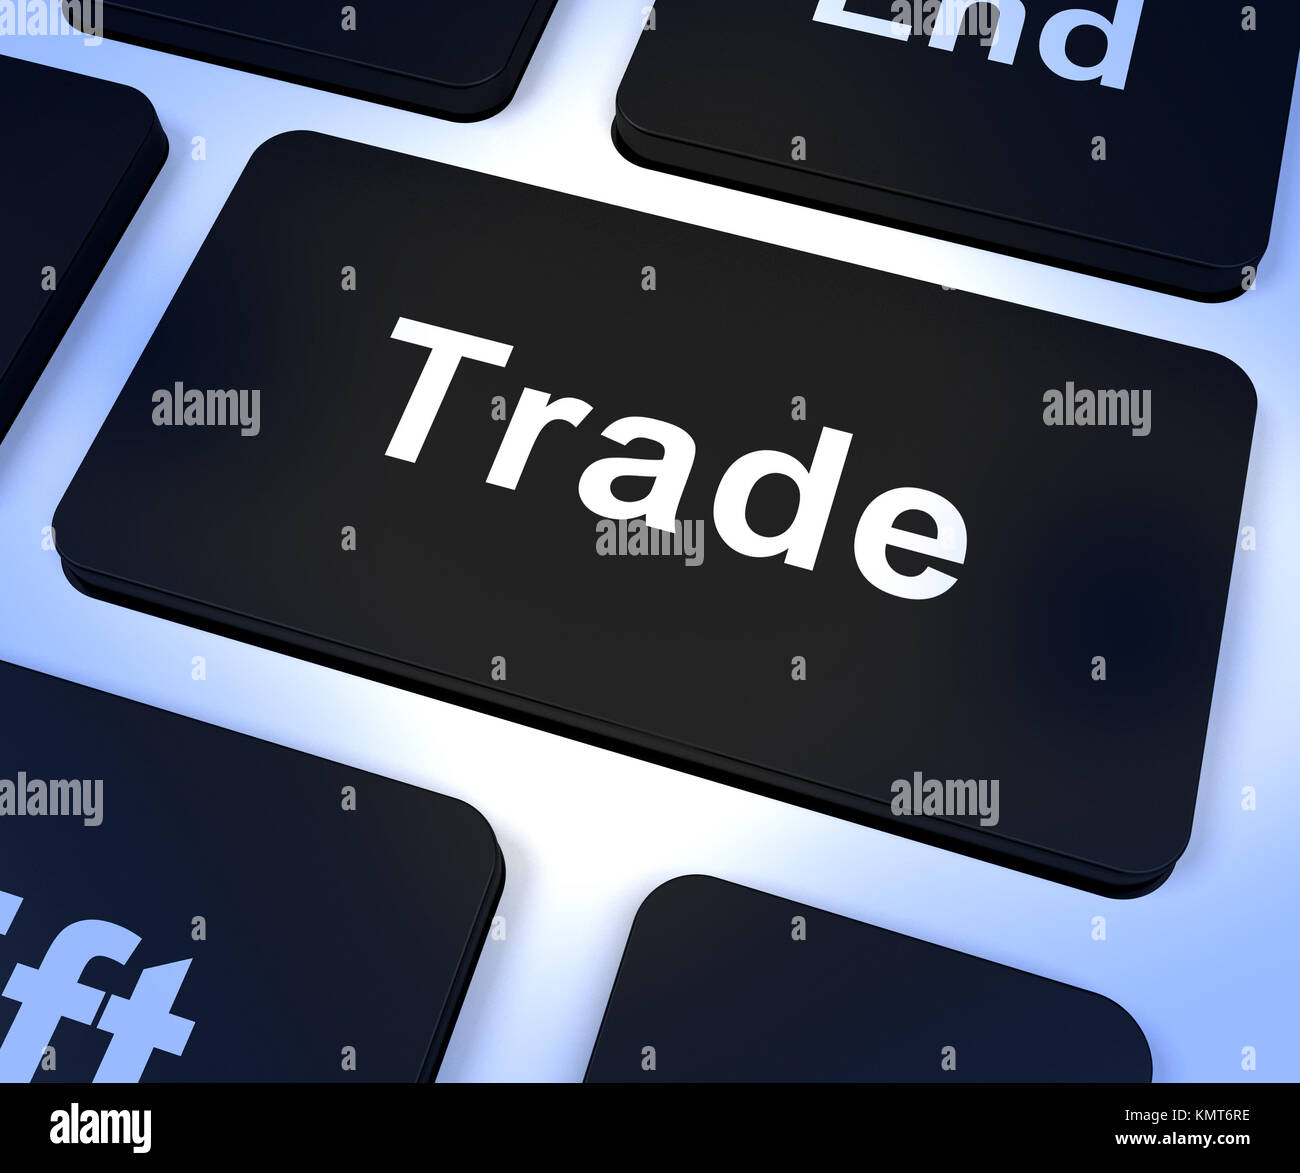 Trade Computer Key Representing Commerce Online Stock Photo